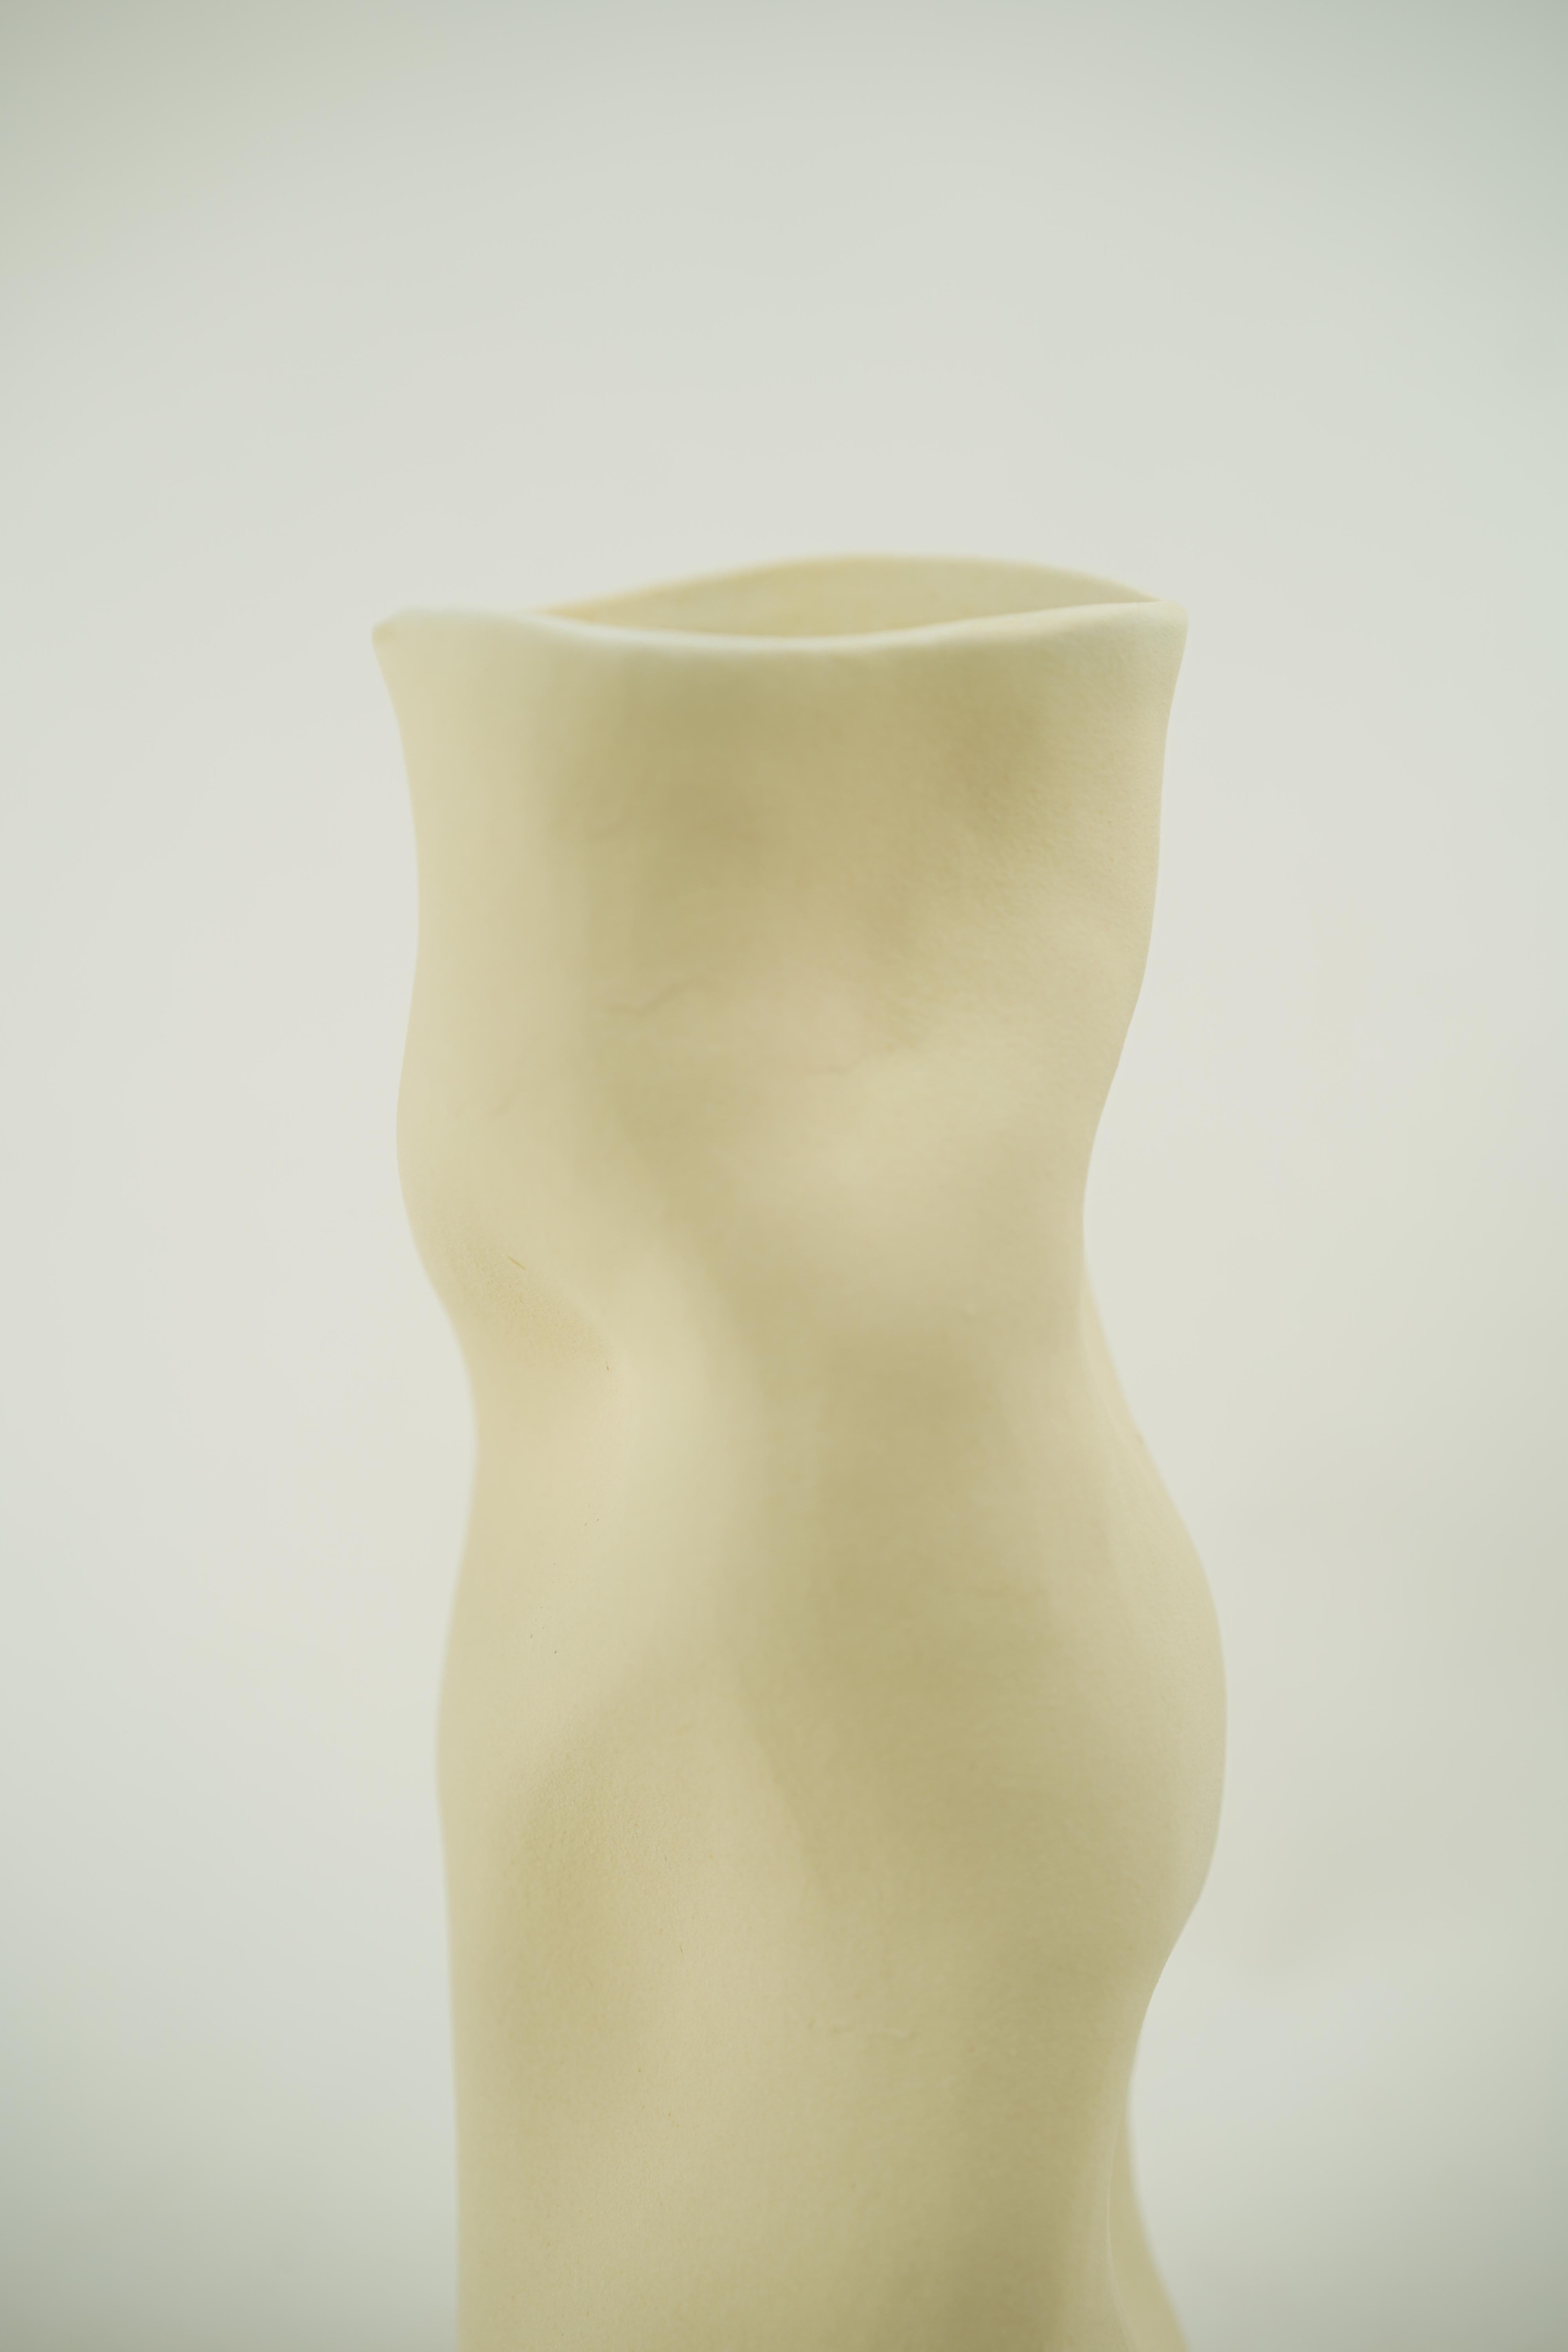 Earthly Body Organic Vase, Available in 4 Colours For Sale 5